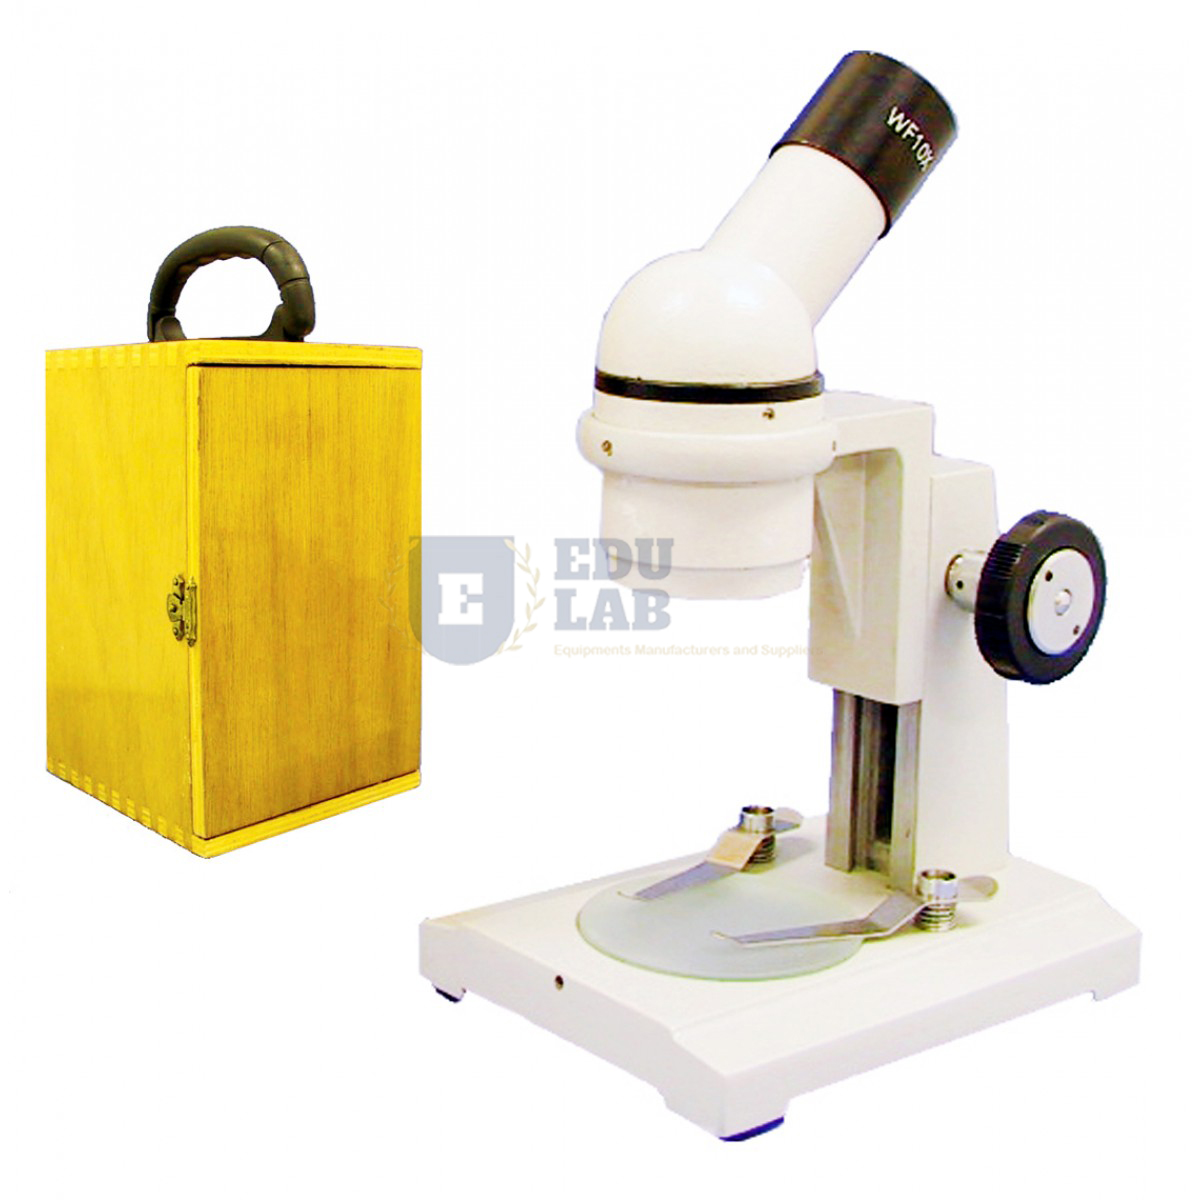 Field Trip Microscope with Wooden Carrying Case